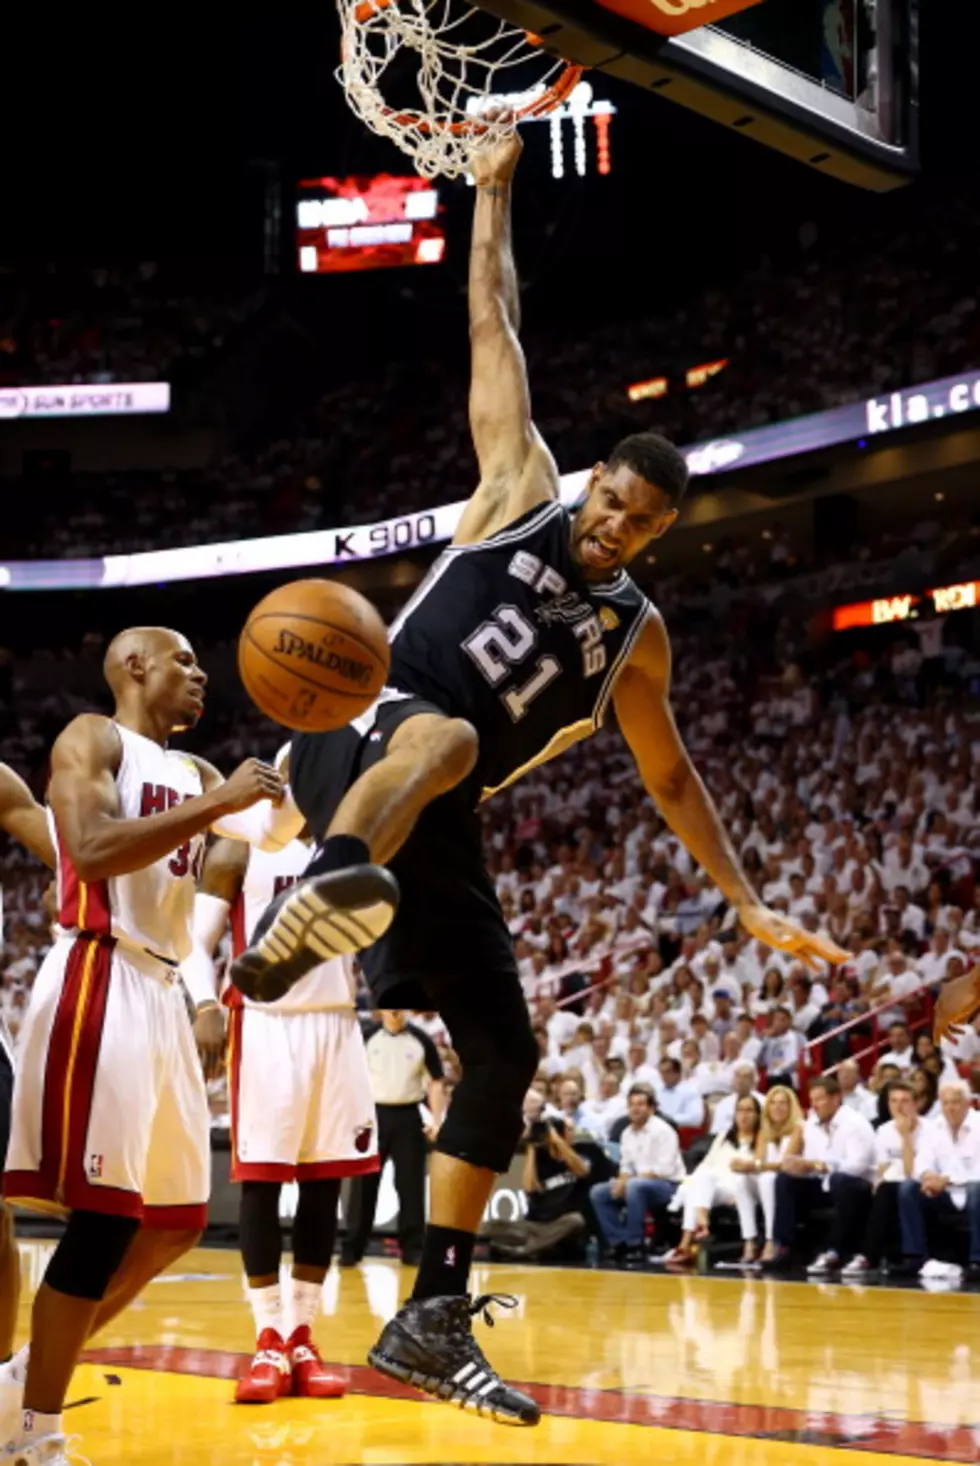 Spurs Completely Dominate Heat, One Win Away From 5th NBA Championship